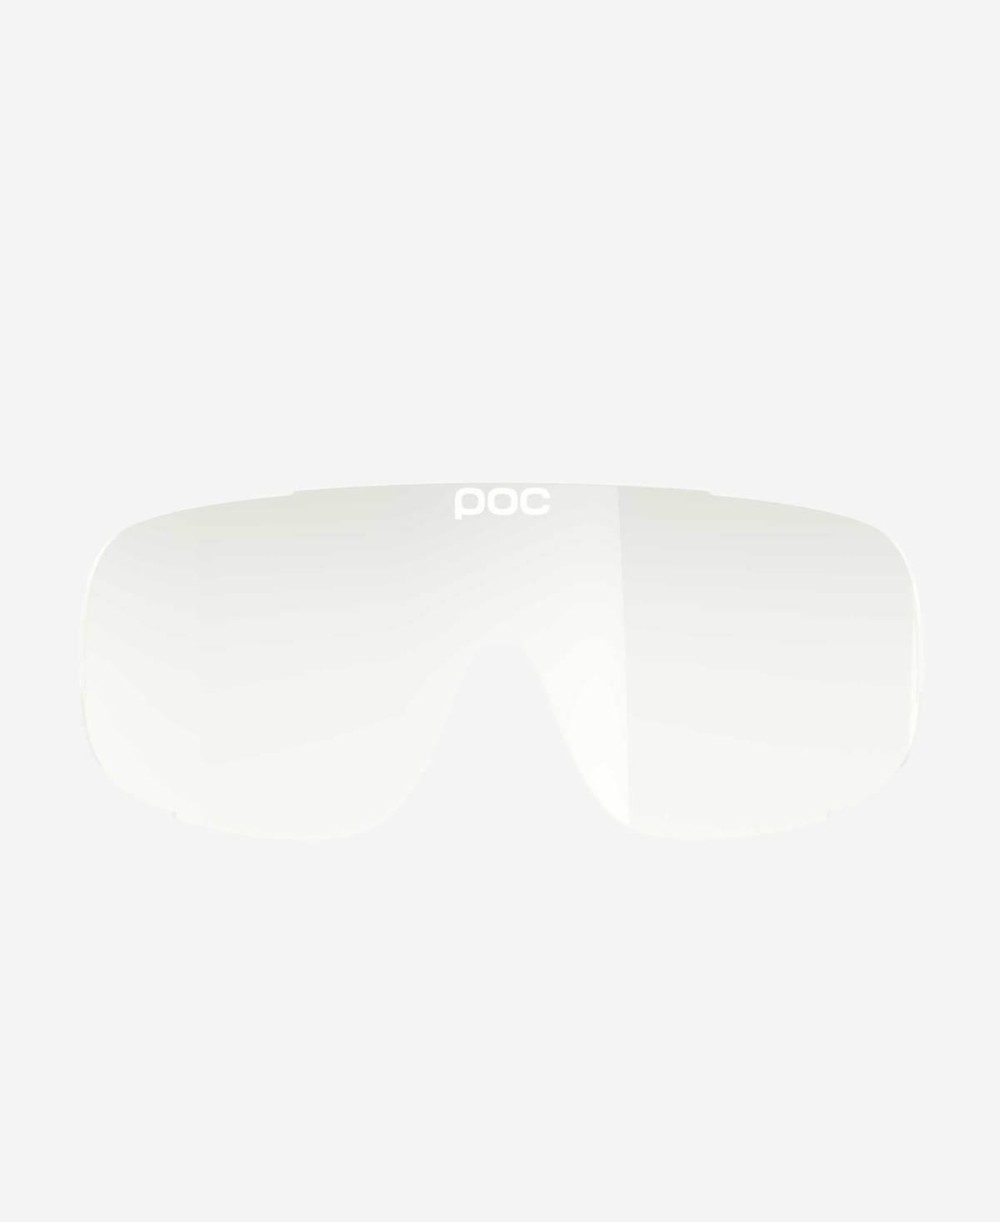 Replacement / Spare Lens for Aspire Cycling Sunglasses image 0